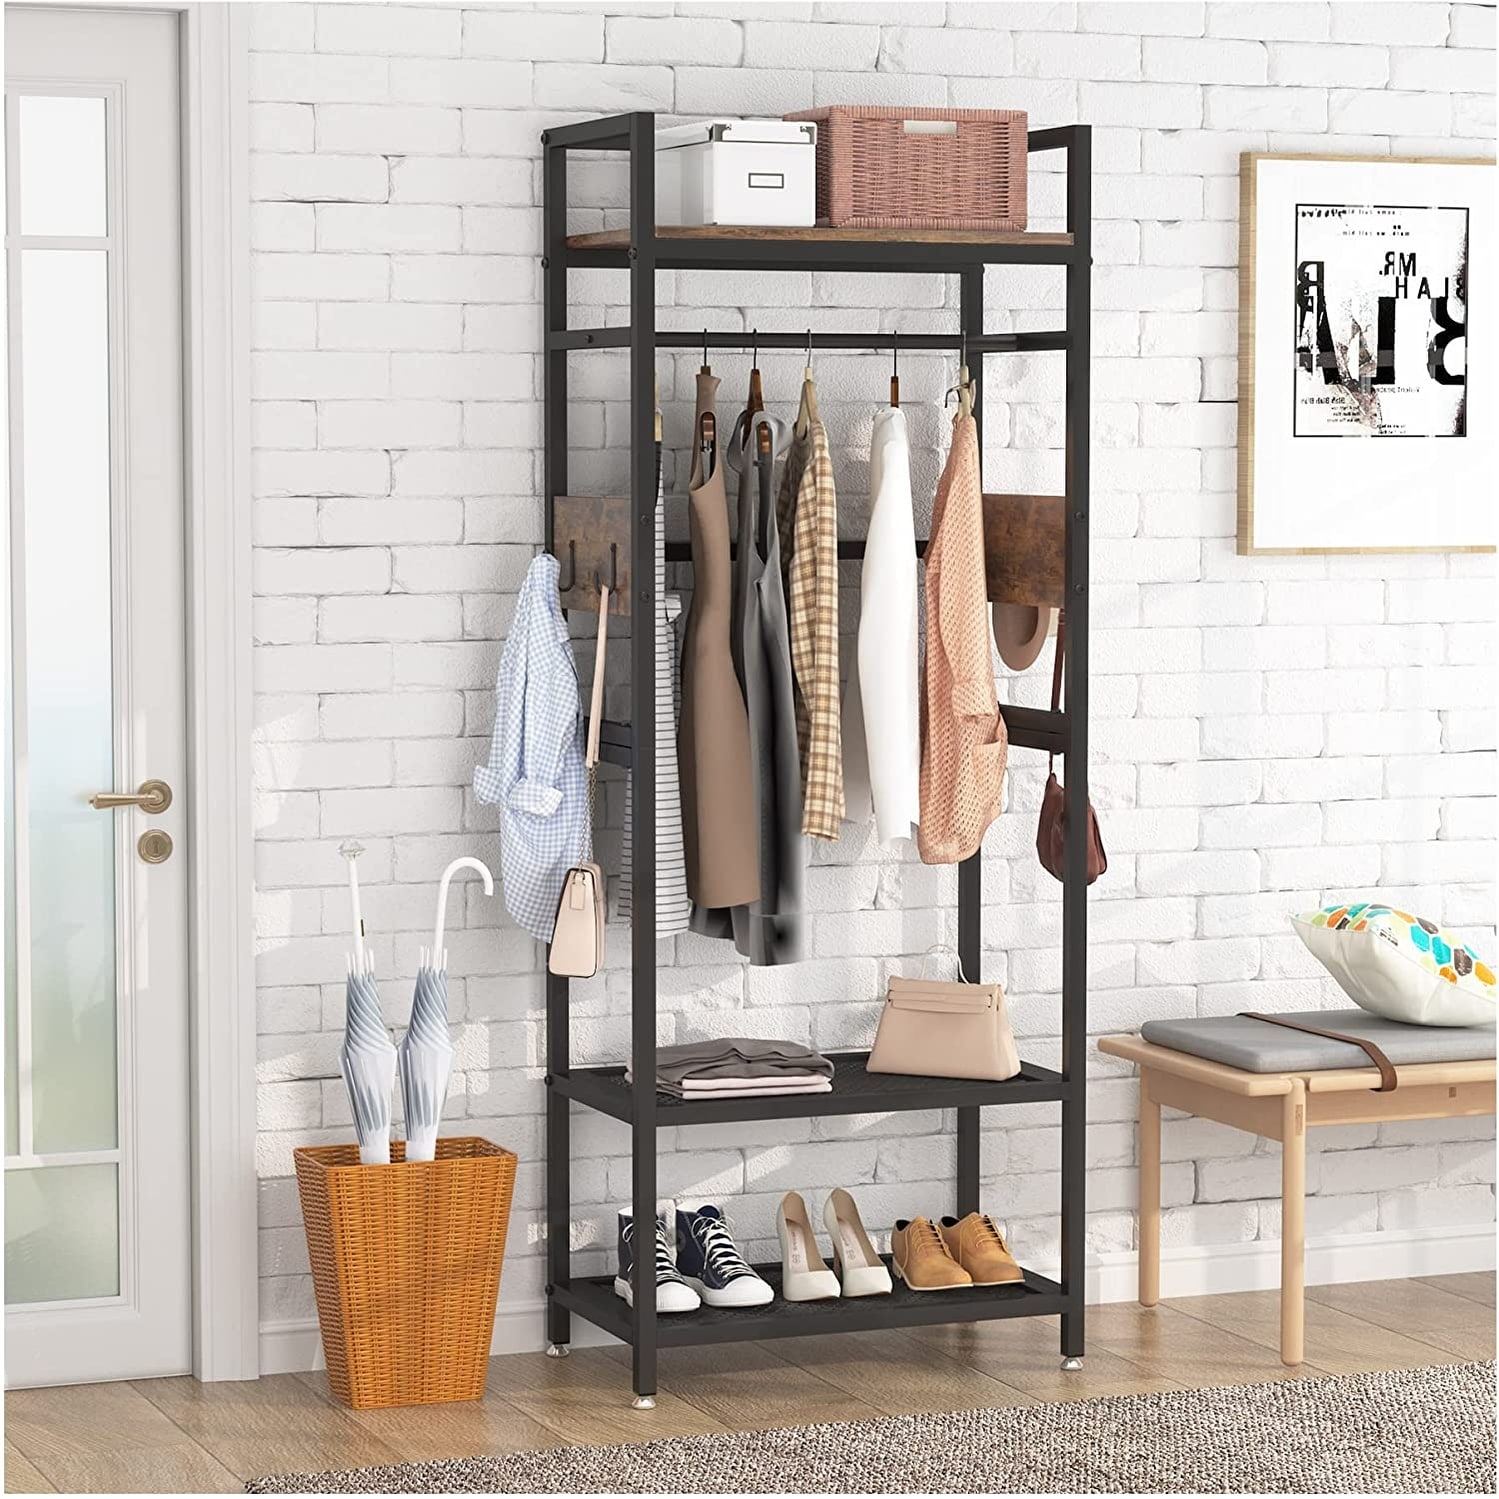 https://ak1.ostkcdn.com/images/products/is/images/direct/2dad2c2e02b762677d090e7767717c1a02814368/Industrial-Hall-Tree%2C-Entryway-Coat-Rack-with-Shoe-Storage-Shelf-and-Hooks%2C-Small-Freestanding-Clothes-Rack.jpg